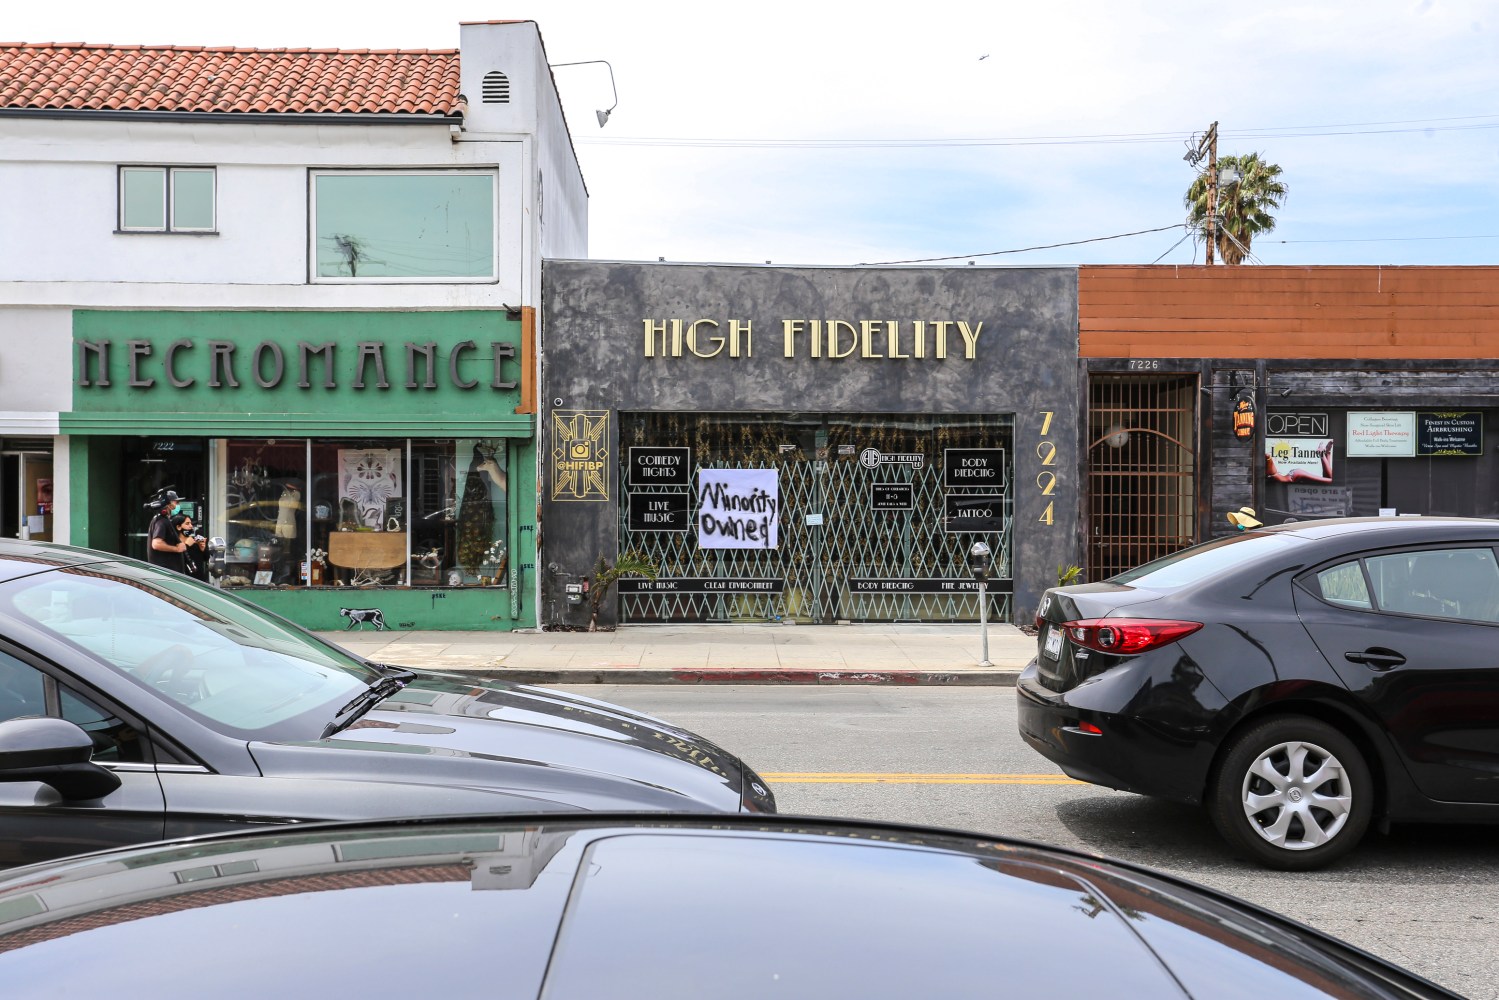 High Fidelity, a black owned business on Melrose Avenue, displays a "Minority Owned" signed in the window with hopes that their business would not be looted or damaged during the riots that took place the night before in Los Angeles, CA on Sunday, May 31, 2020. (Photo by Desmond A. Hester / Sipa USA)No Use UK. No Use Germany.